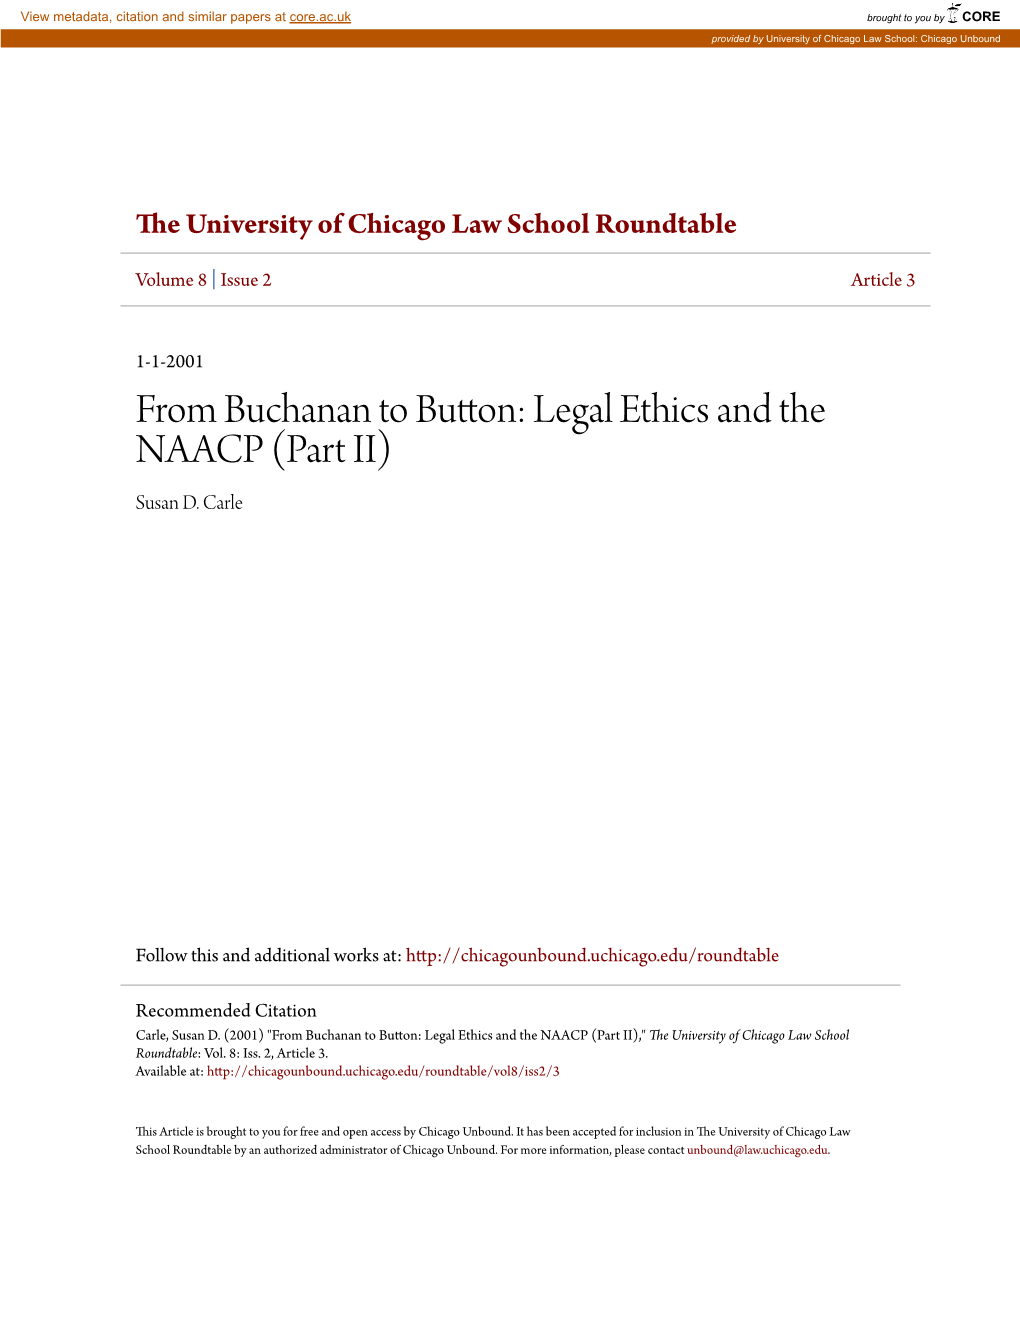 From Buchanan to Button: Legal Ethics and the NAACP (Part II) Susan D